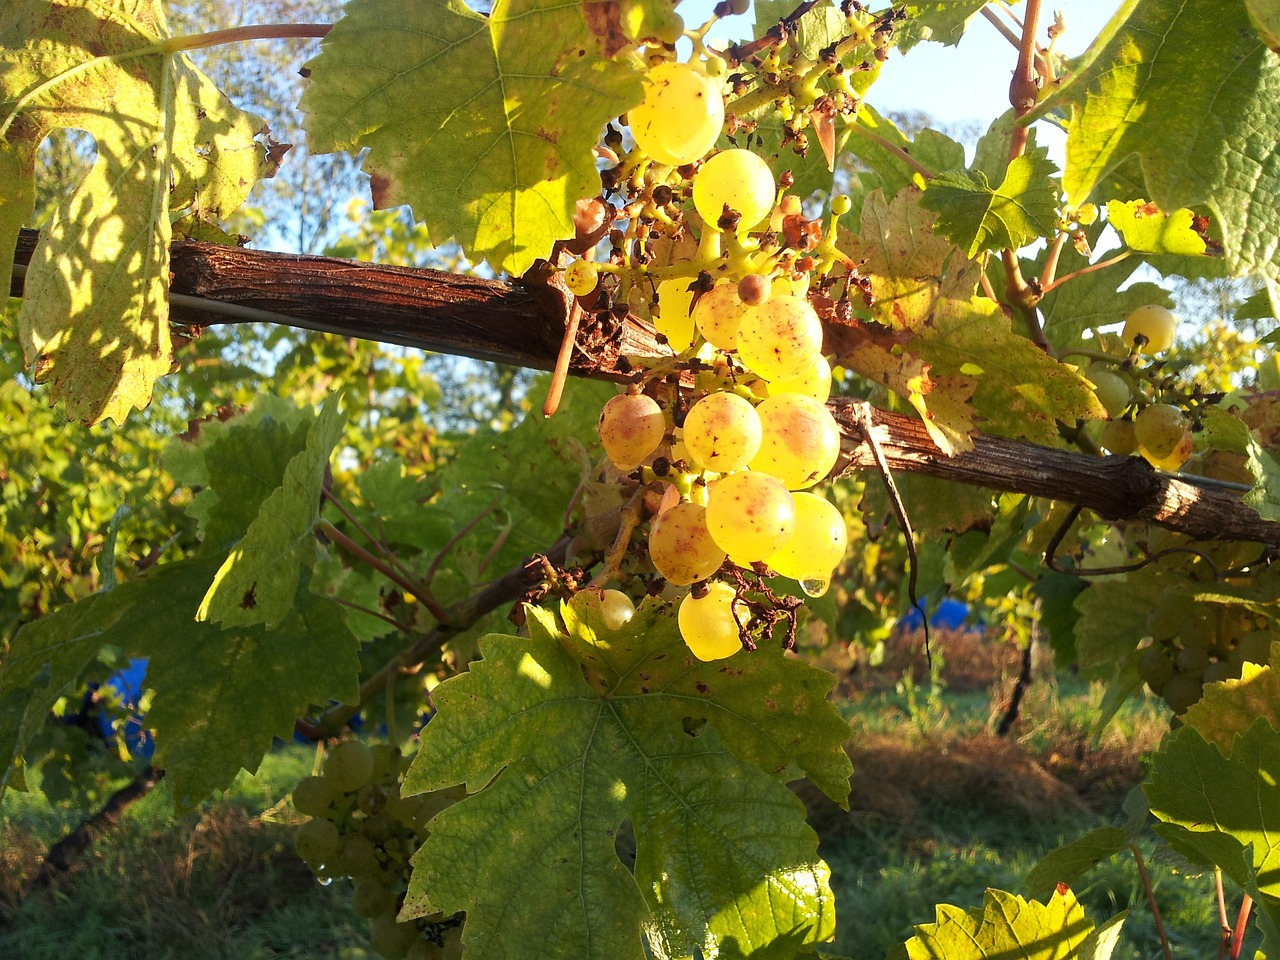 Photograph of seyval blanc grapes growing in an English vineyard